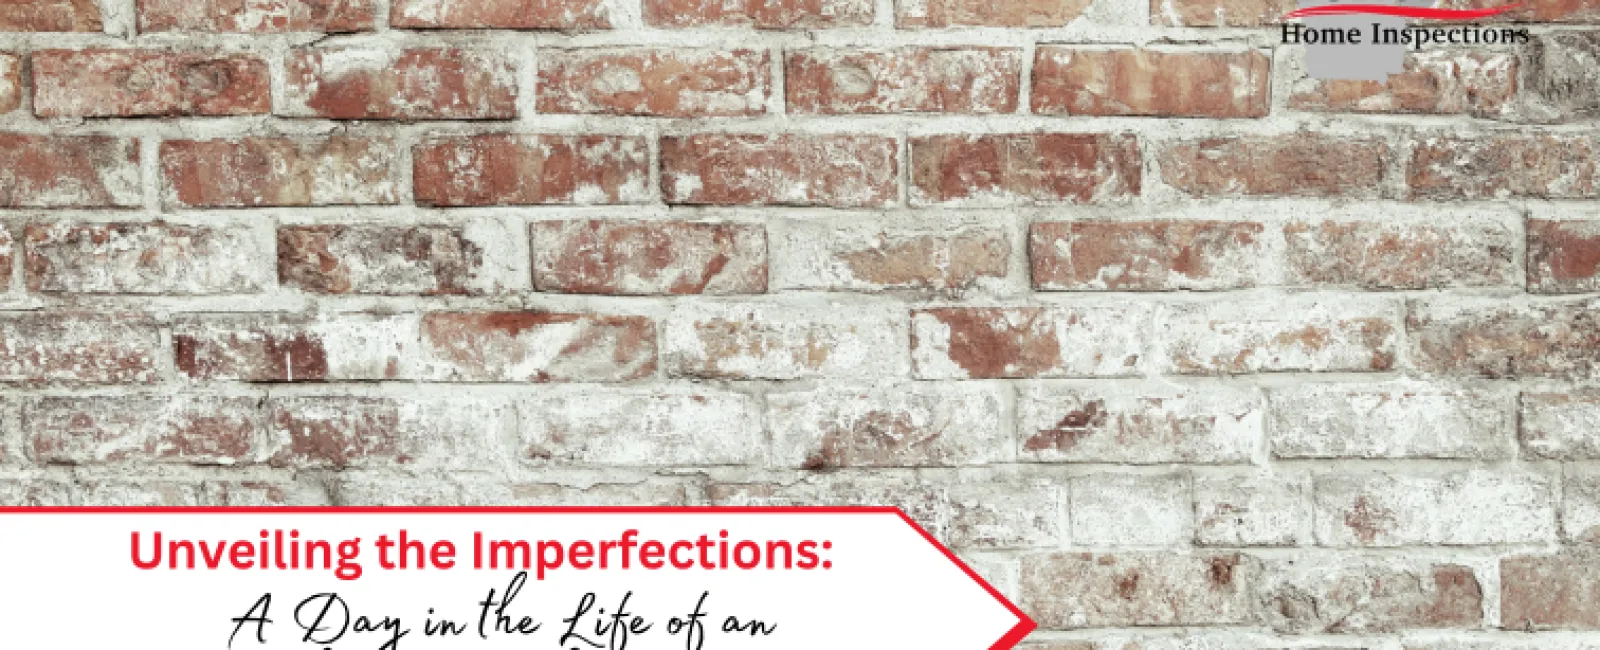 Unveiling the Imperfections: A Day in the Life of an Ashi-Certified Inspector